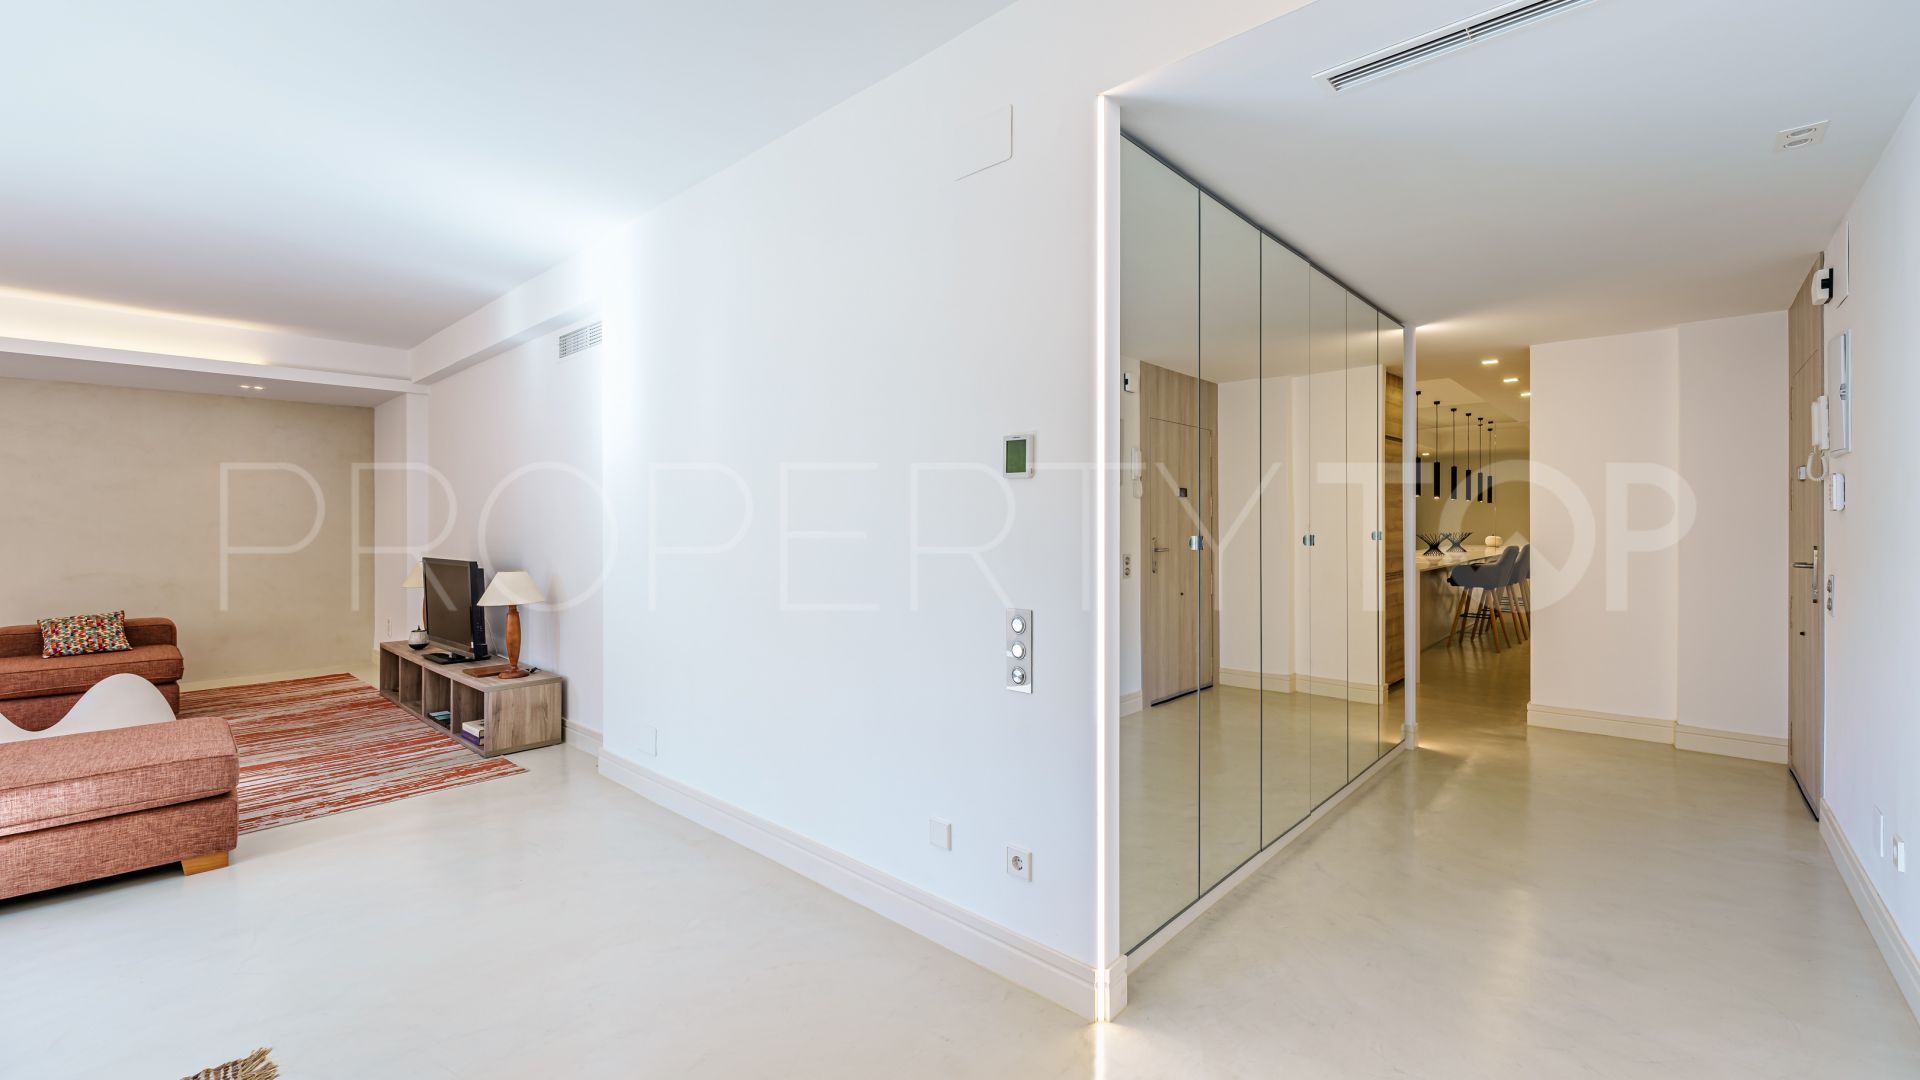 For sale Malaga apartment with 3 bedrooms